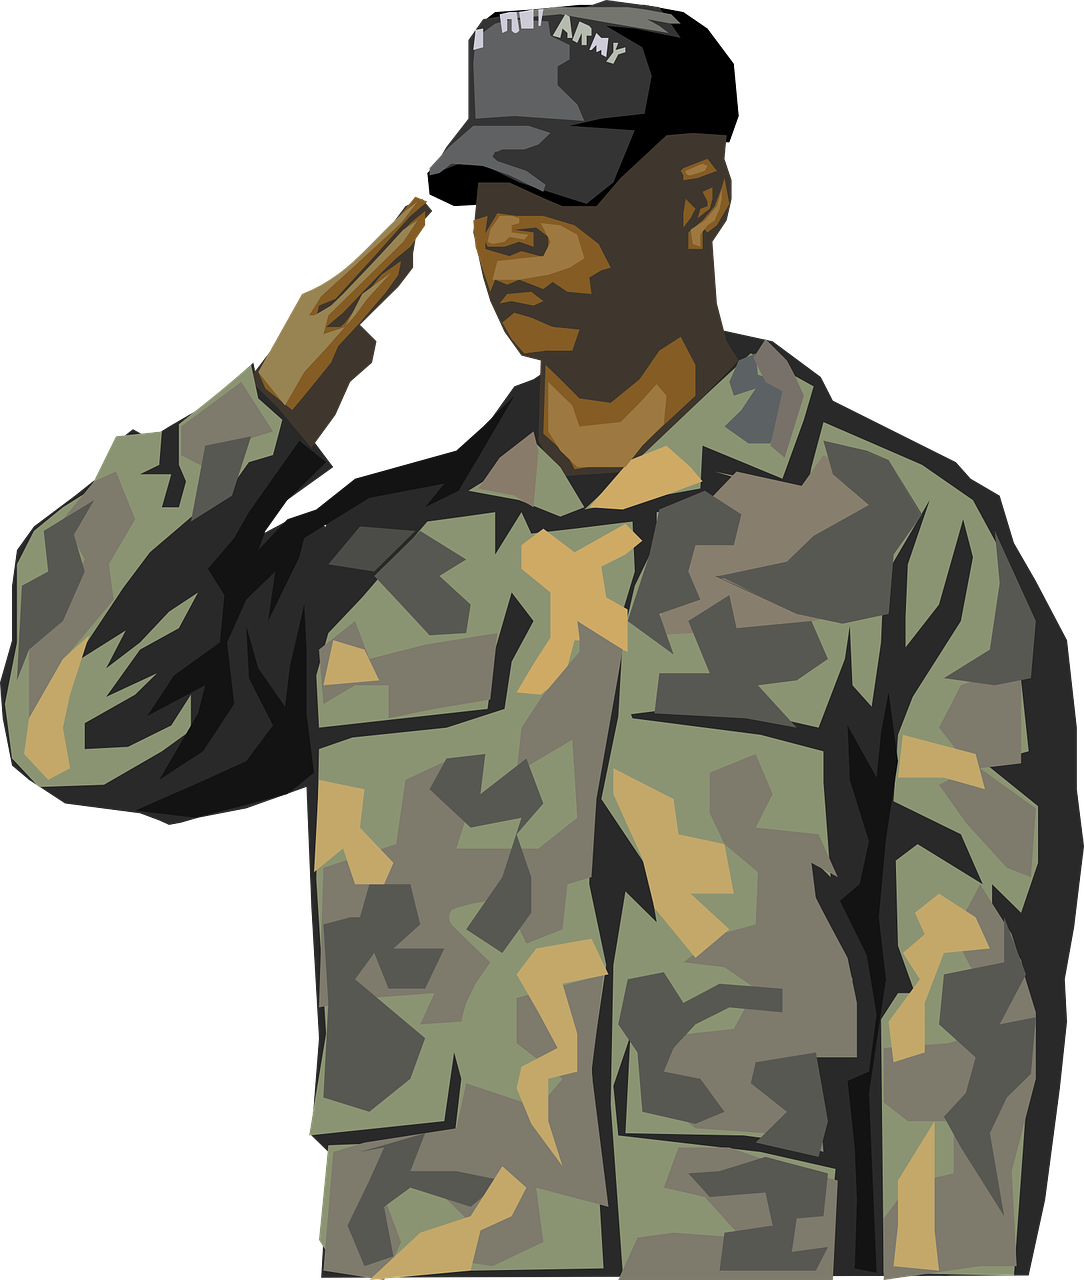 soldier saluting salute free photo